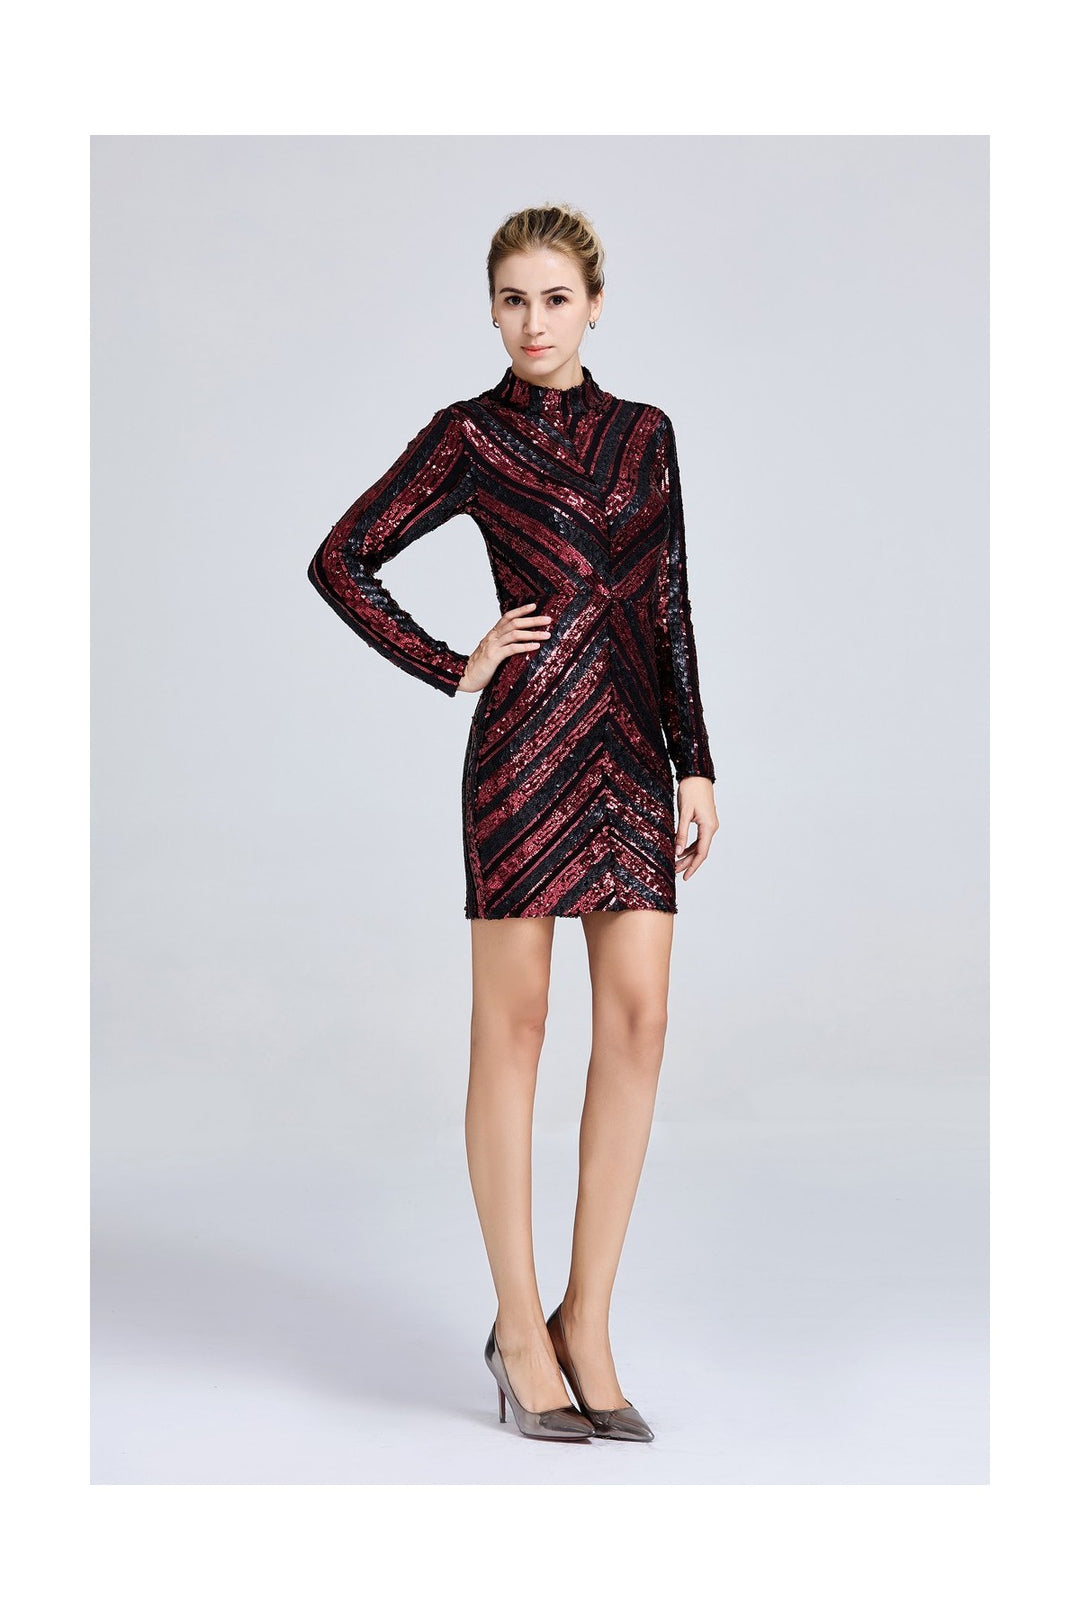 Black & Red Two-tone Mini Bodycon Sequin Dress - Front View